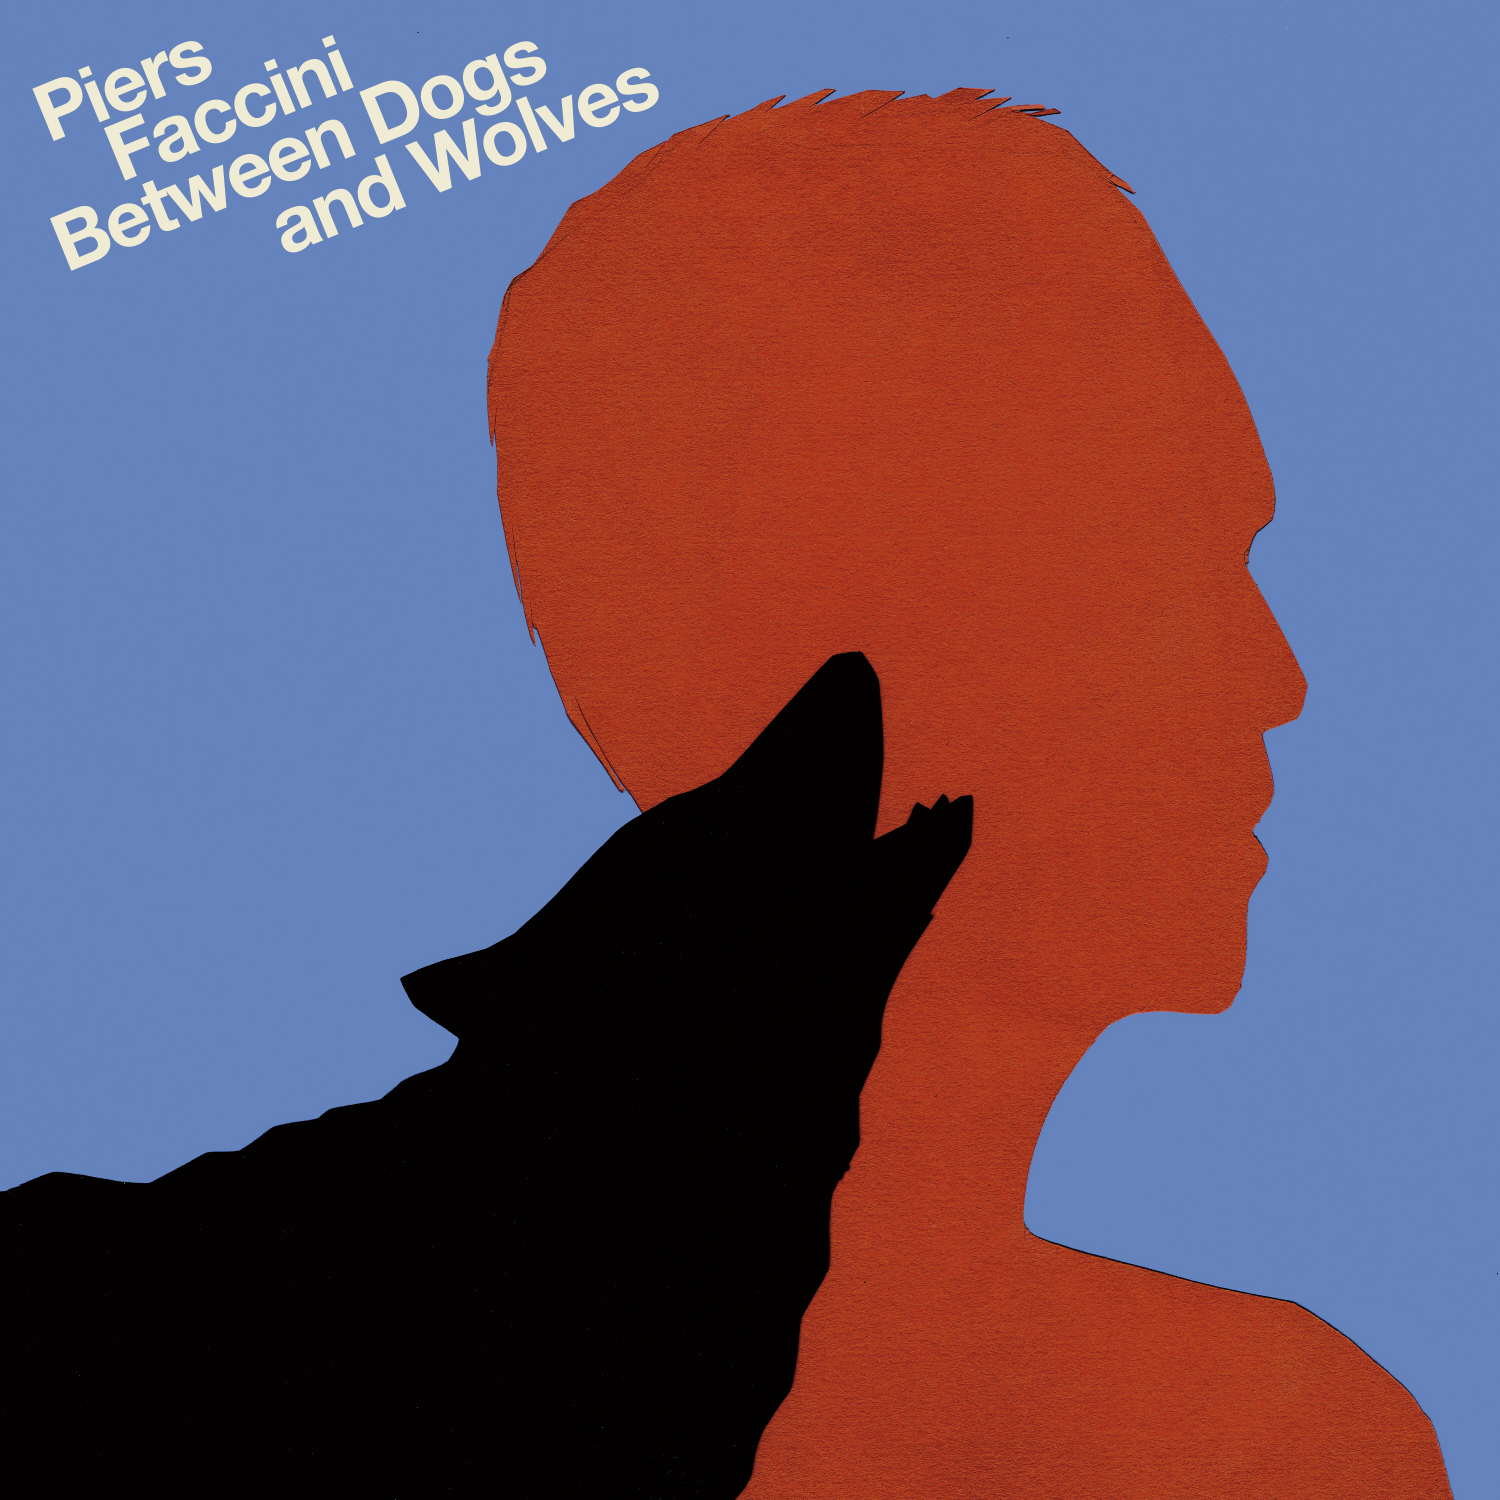 Piers Faccini – Between Dogs and Wolves